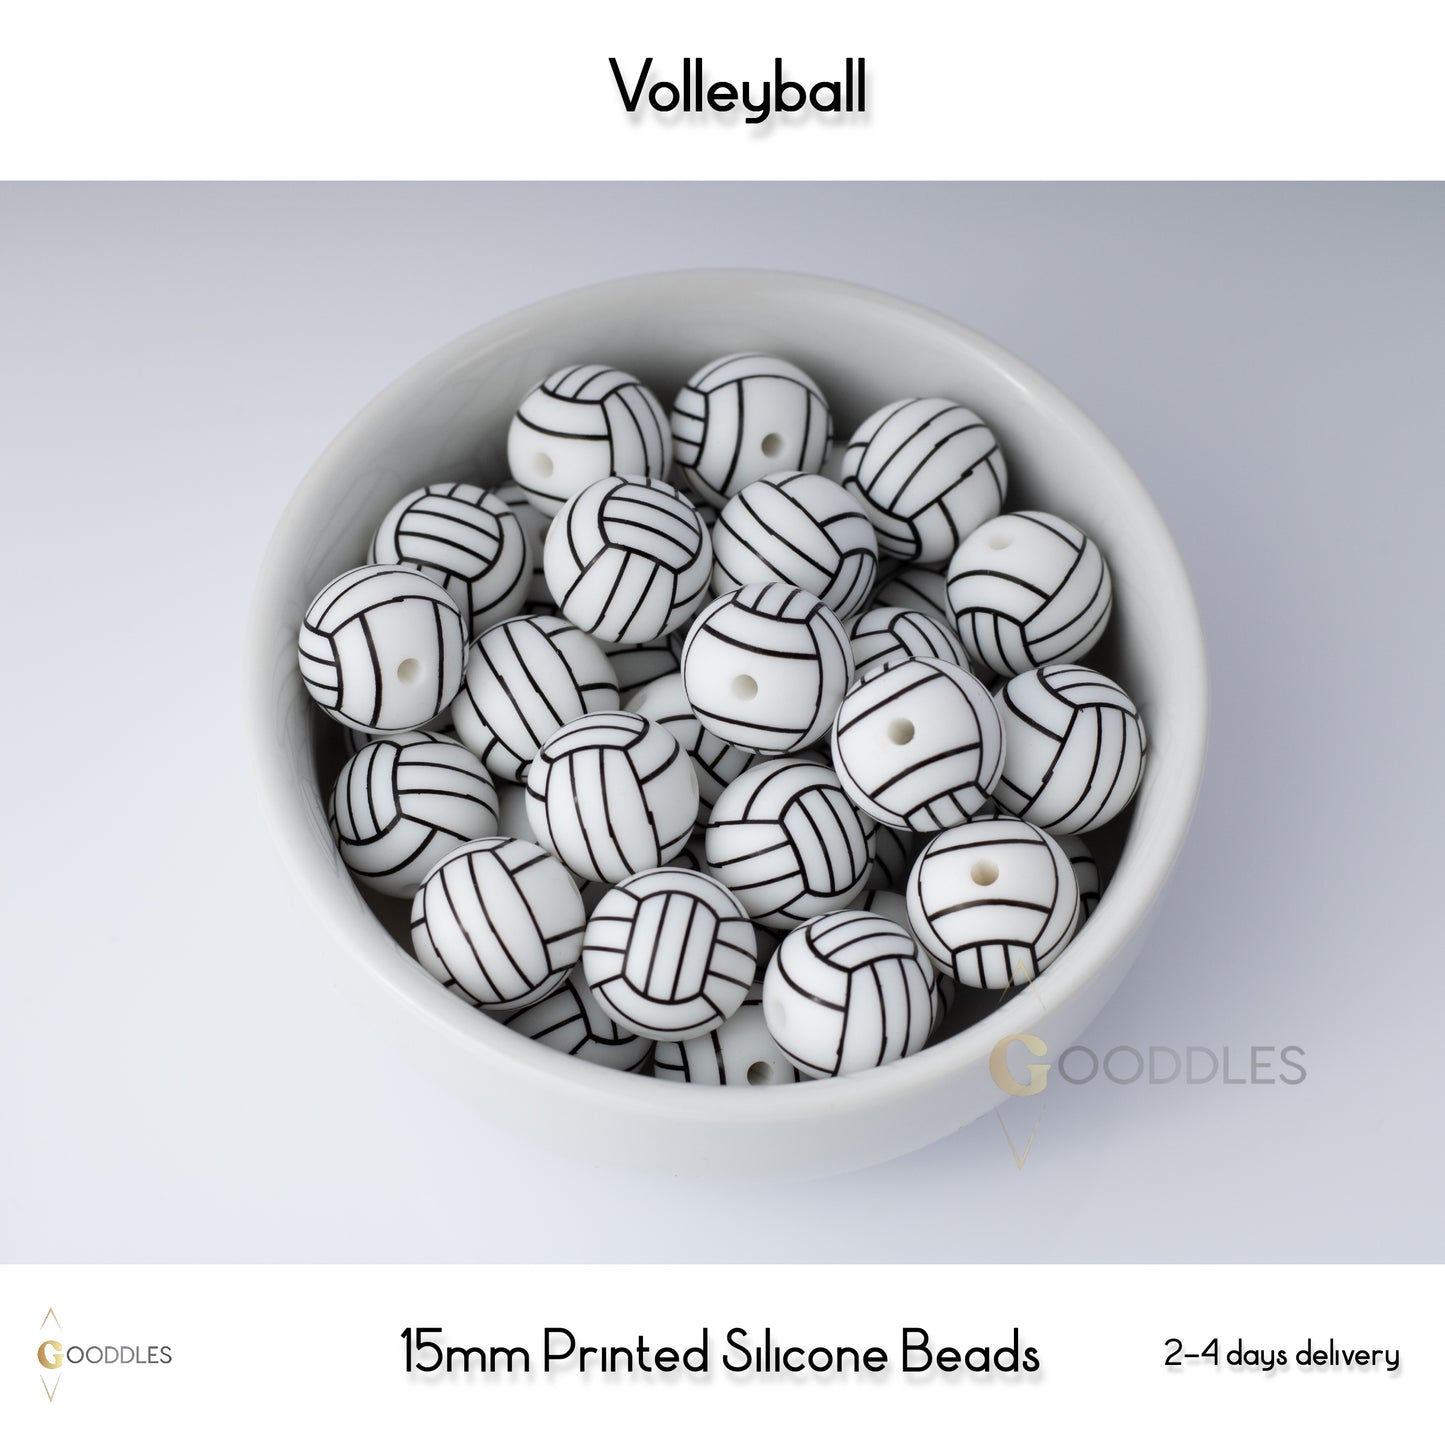 5pcs, Volleyball Silicone Beads Printed Round Silicone Beads